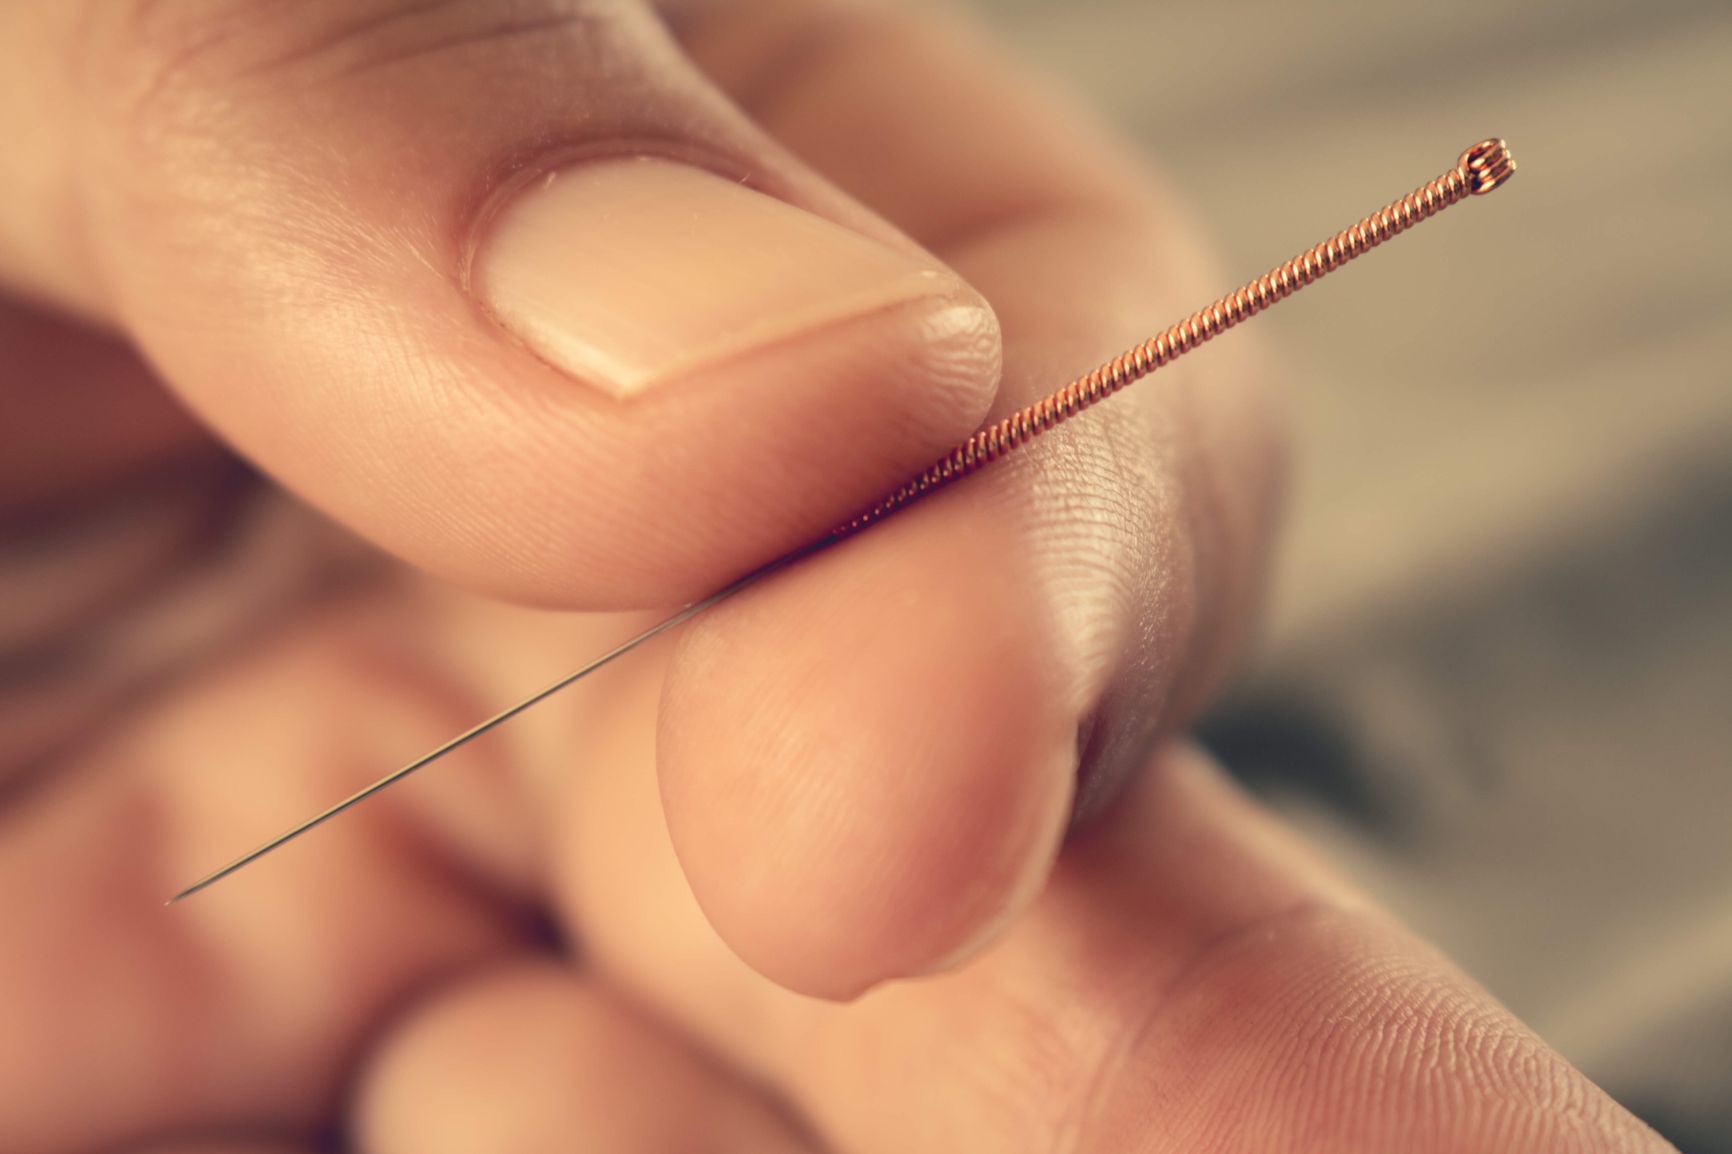 An acupuncture needle